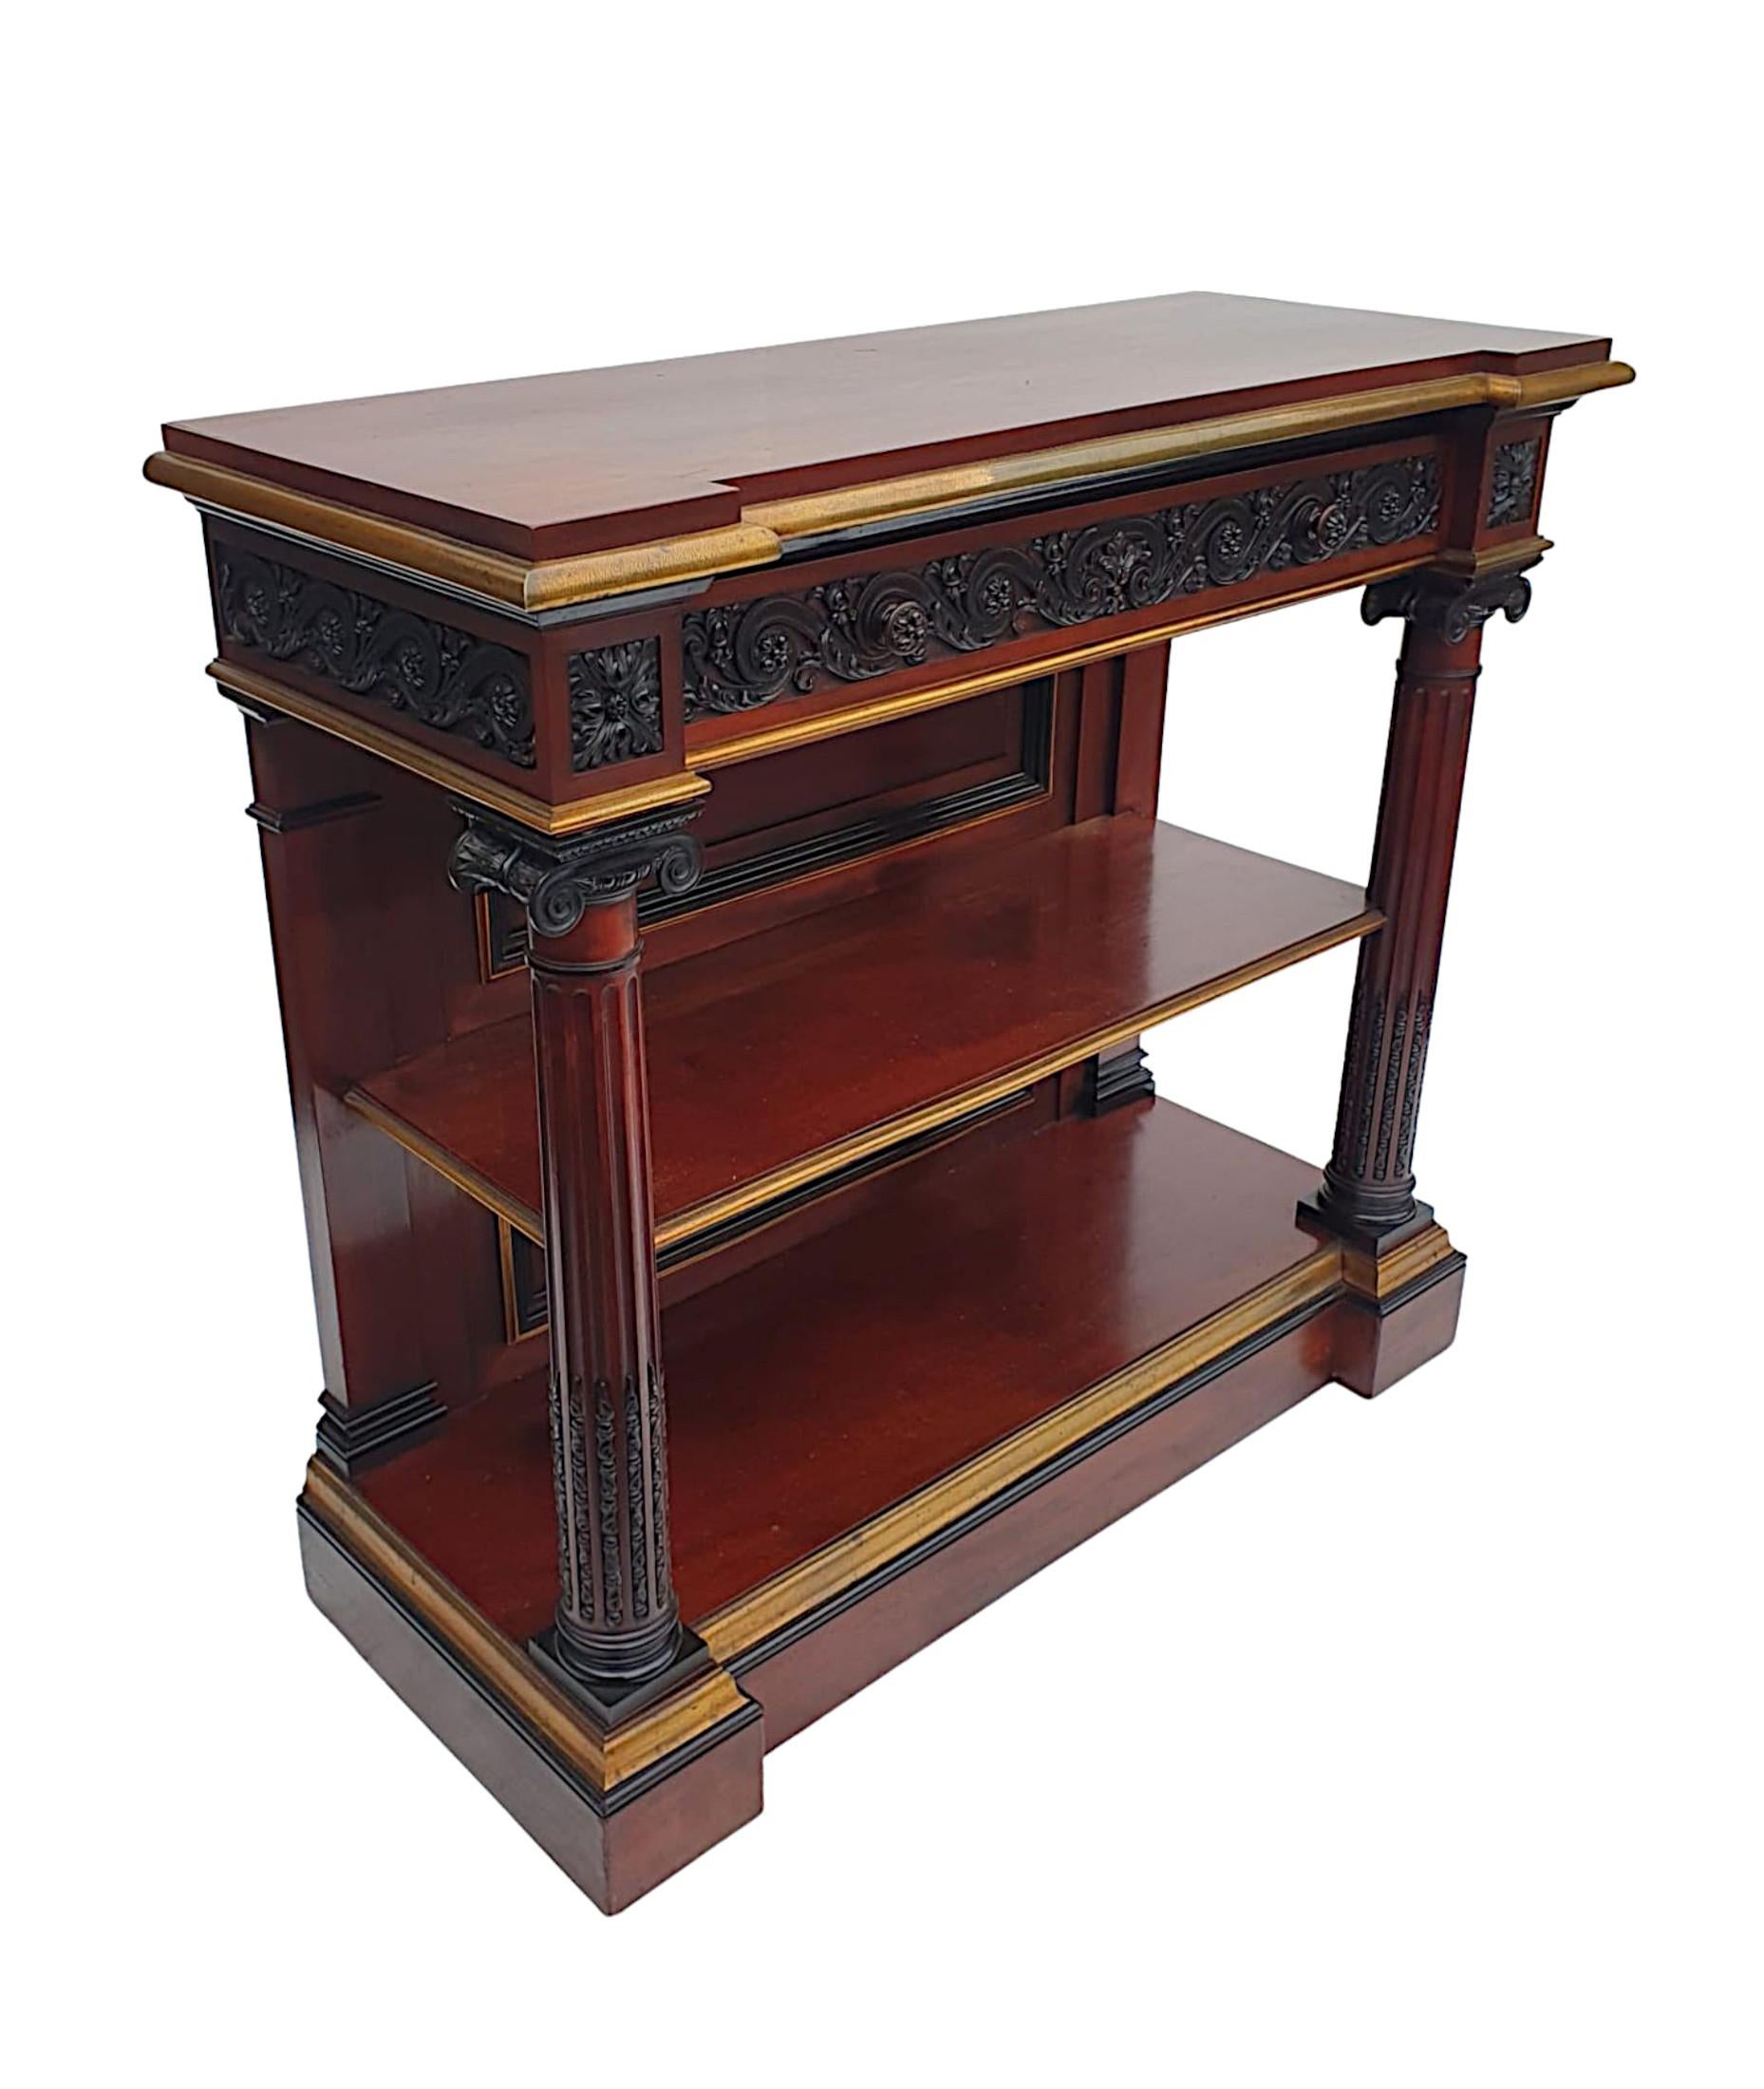 A very fine and rare 19th century mahogany two tier console table with brass mounts and ebonized detail throughout. The shaped and moulded top raised over frieze with single long drawer, intricately hand carved with guilloche, flowerheads, foliate,